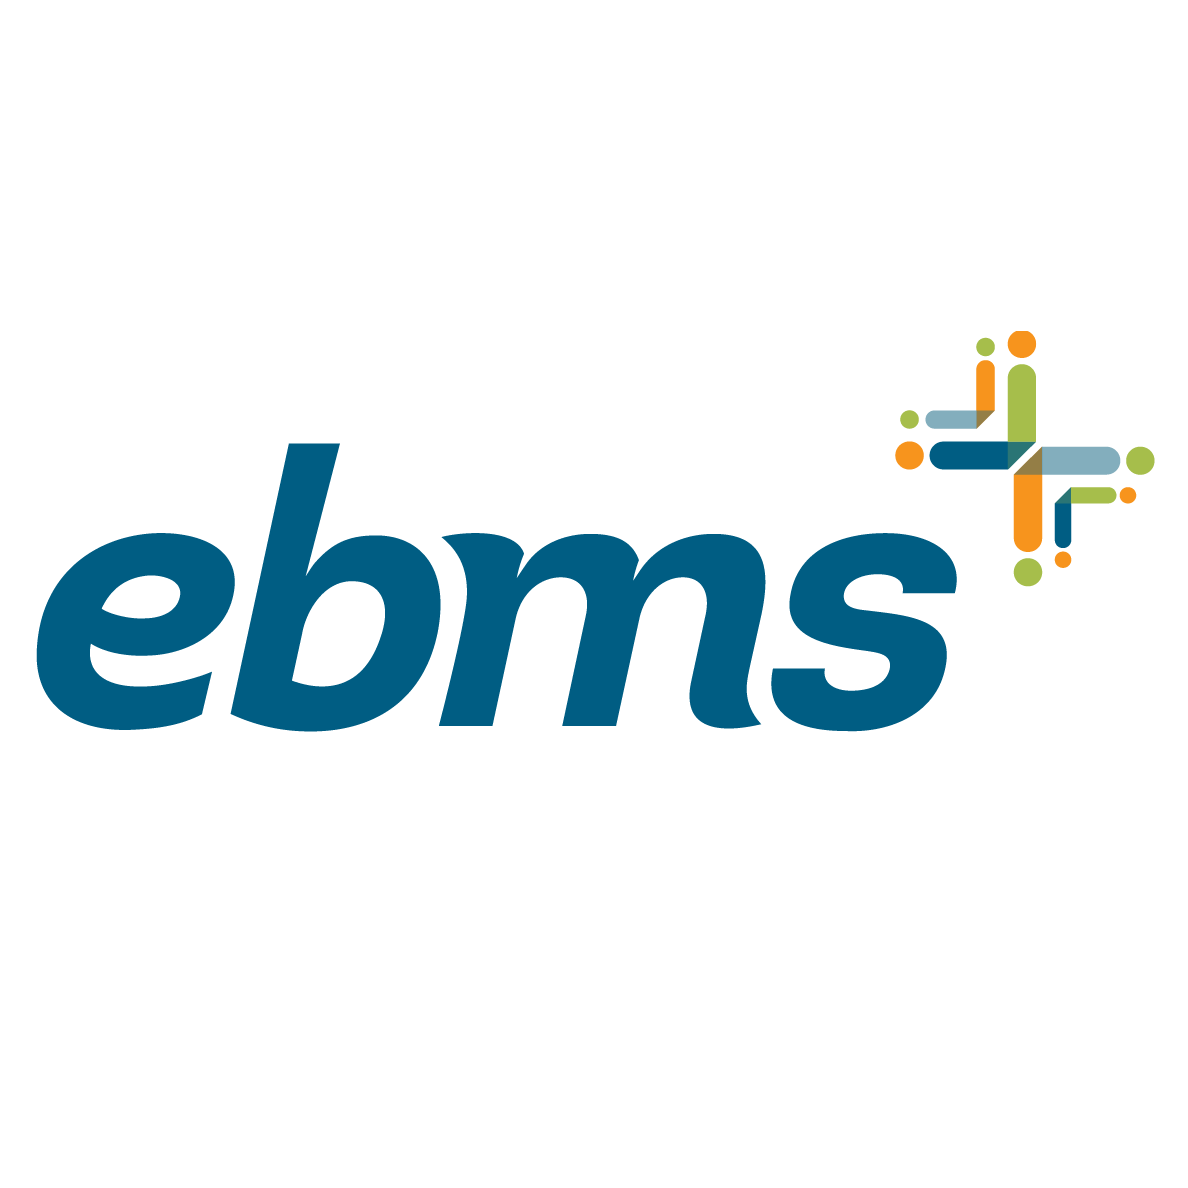 Employee Benefit Management Services (EBMS)